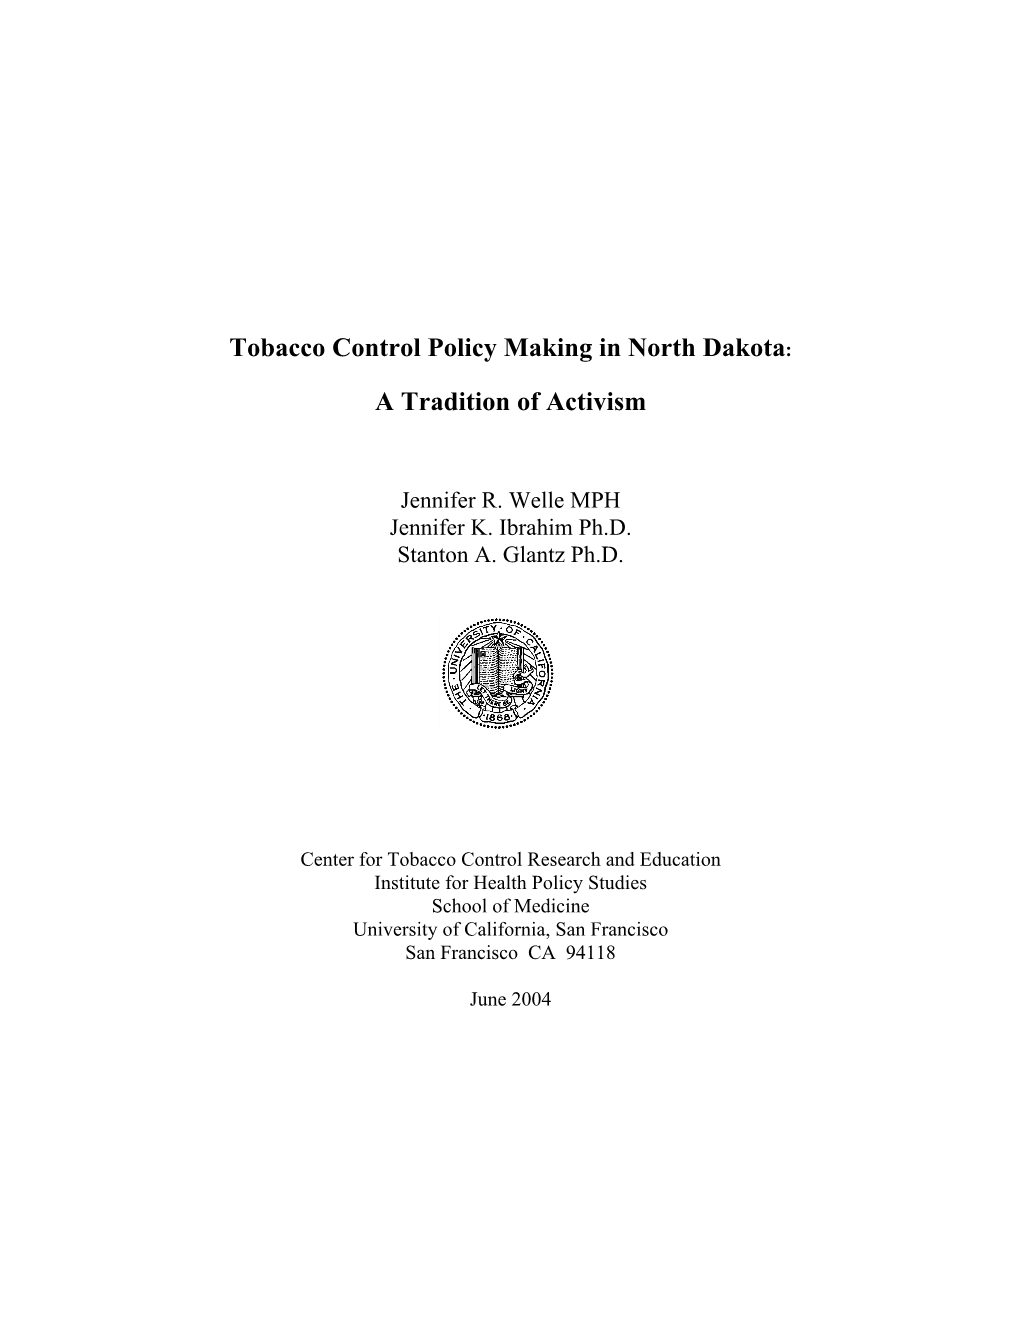 Tobacco Control Policy Making in North Dakota: a Tradition of Activism